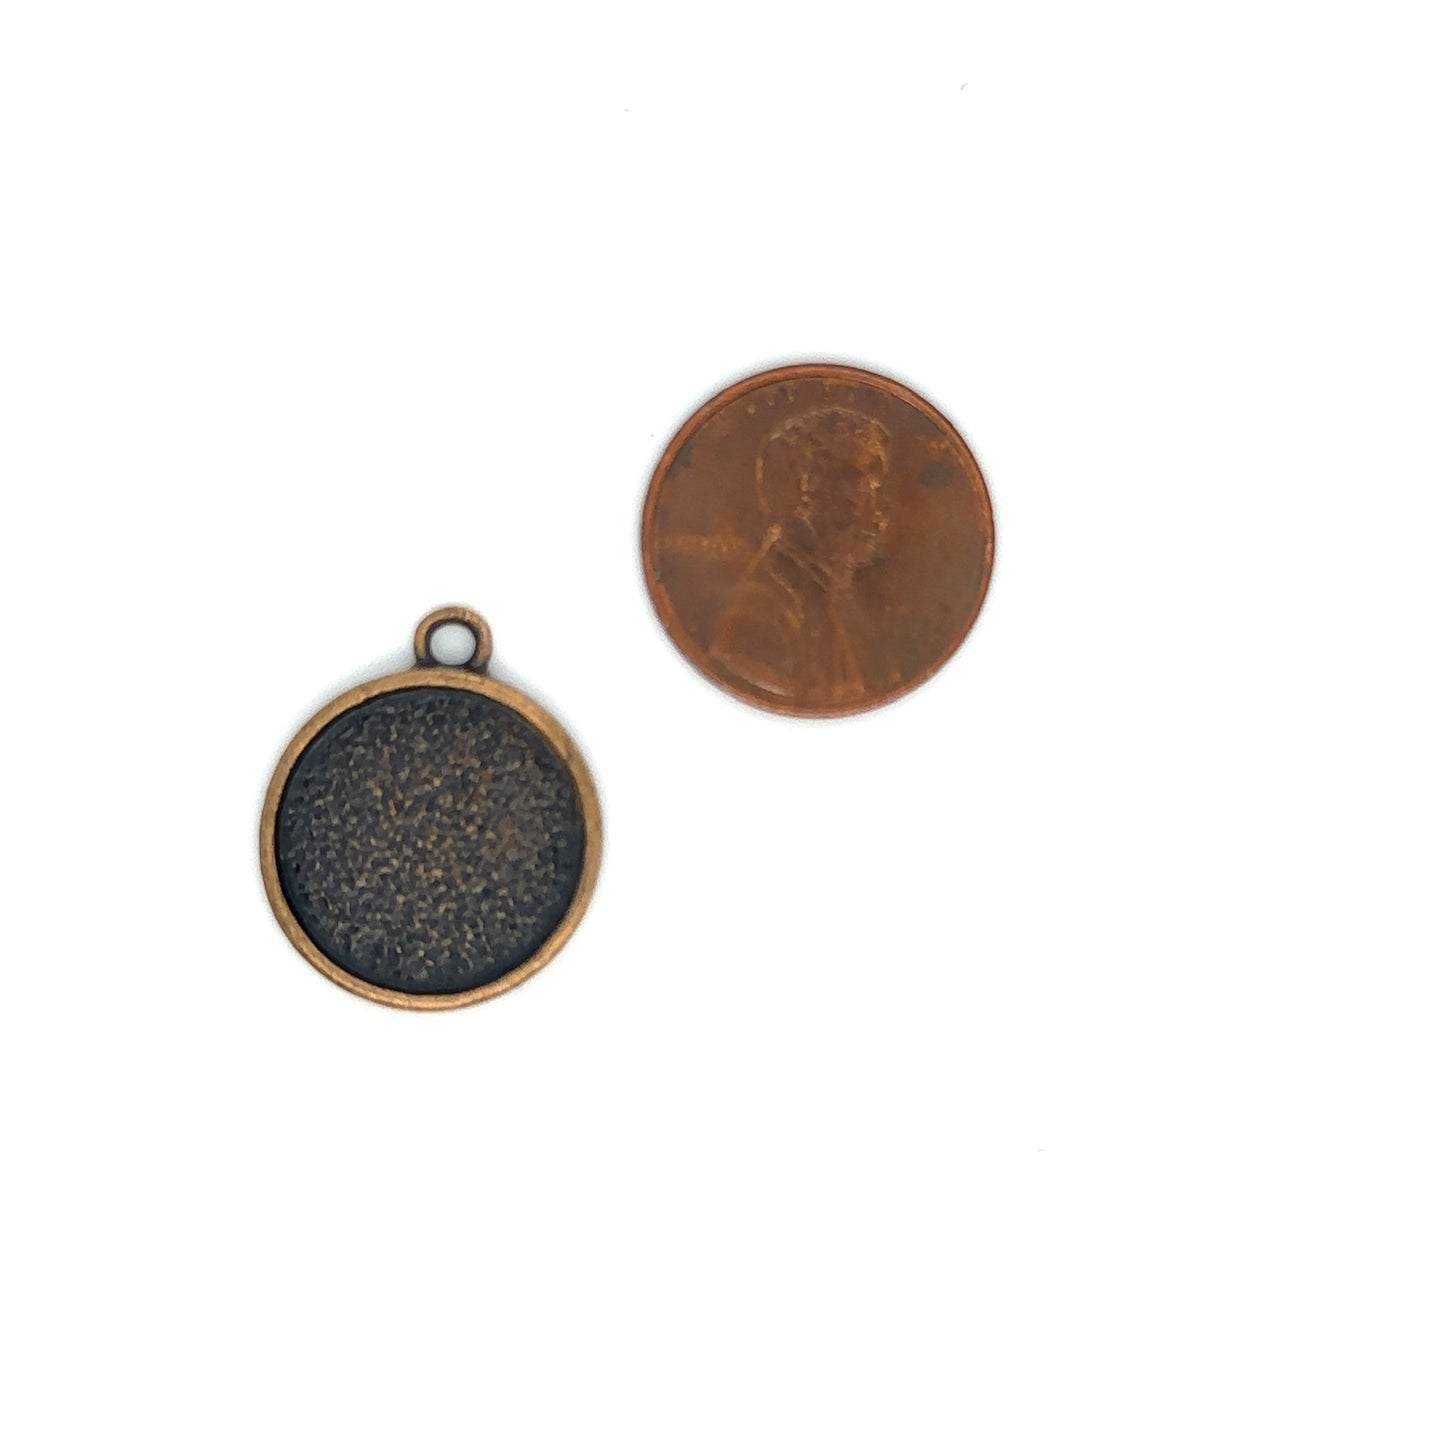 16mm round blank charm setting pendant Antique Copper